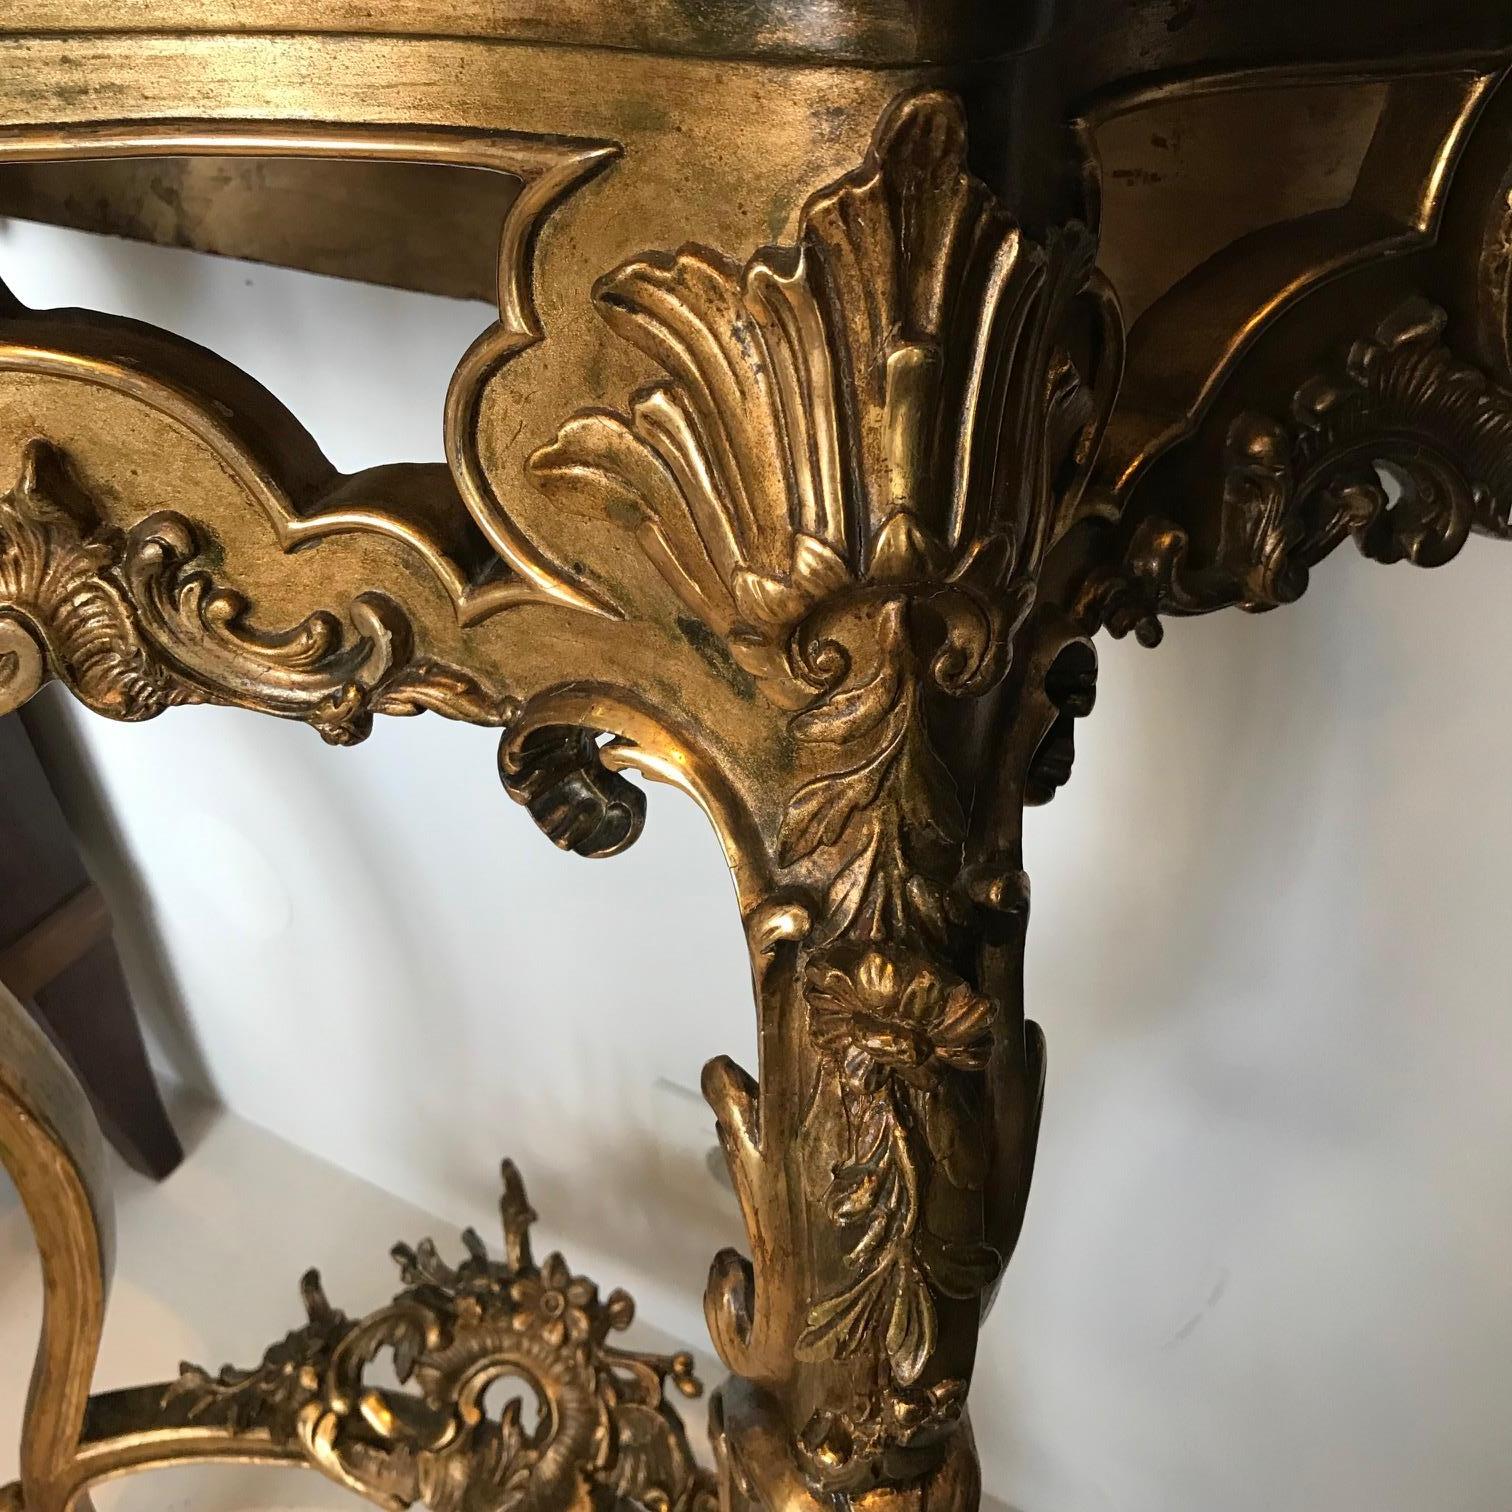 This lovely Rococo Revival console table from the mid-19th century comes from France. It has white Carrara marble serpentine top. The all body is gilded some parts are bolded in high gloss. Along the cabriole legs waving stylized Acanthus leaf. They